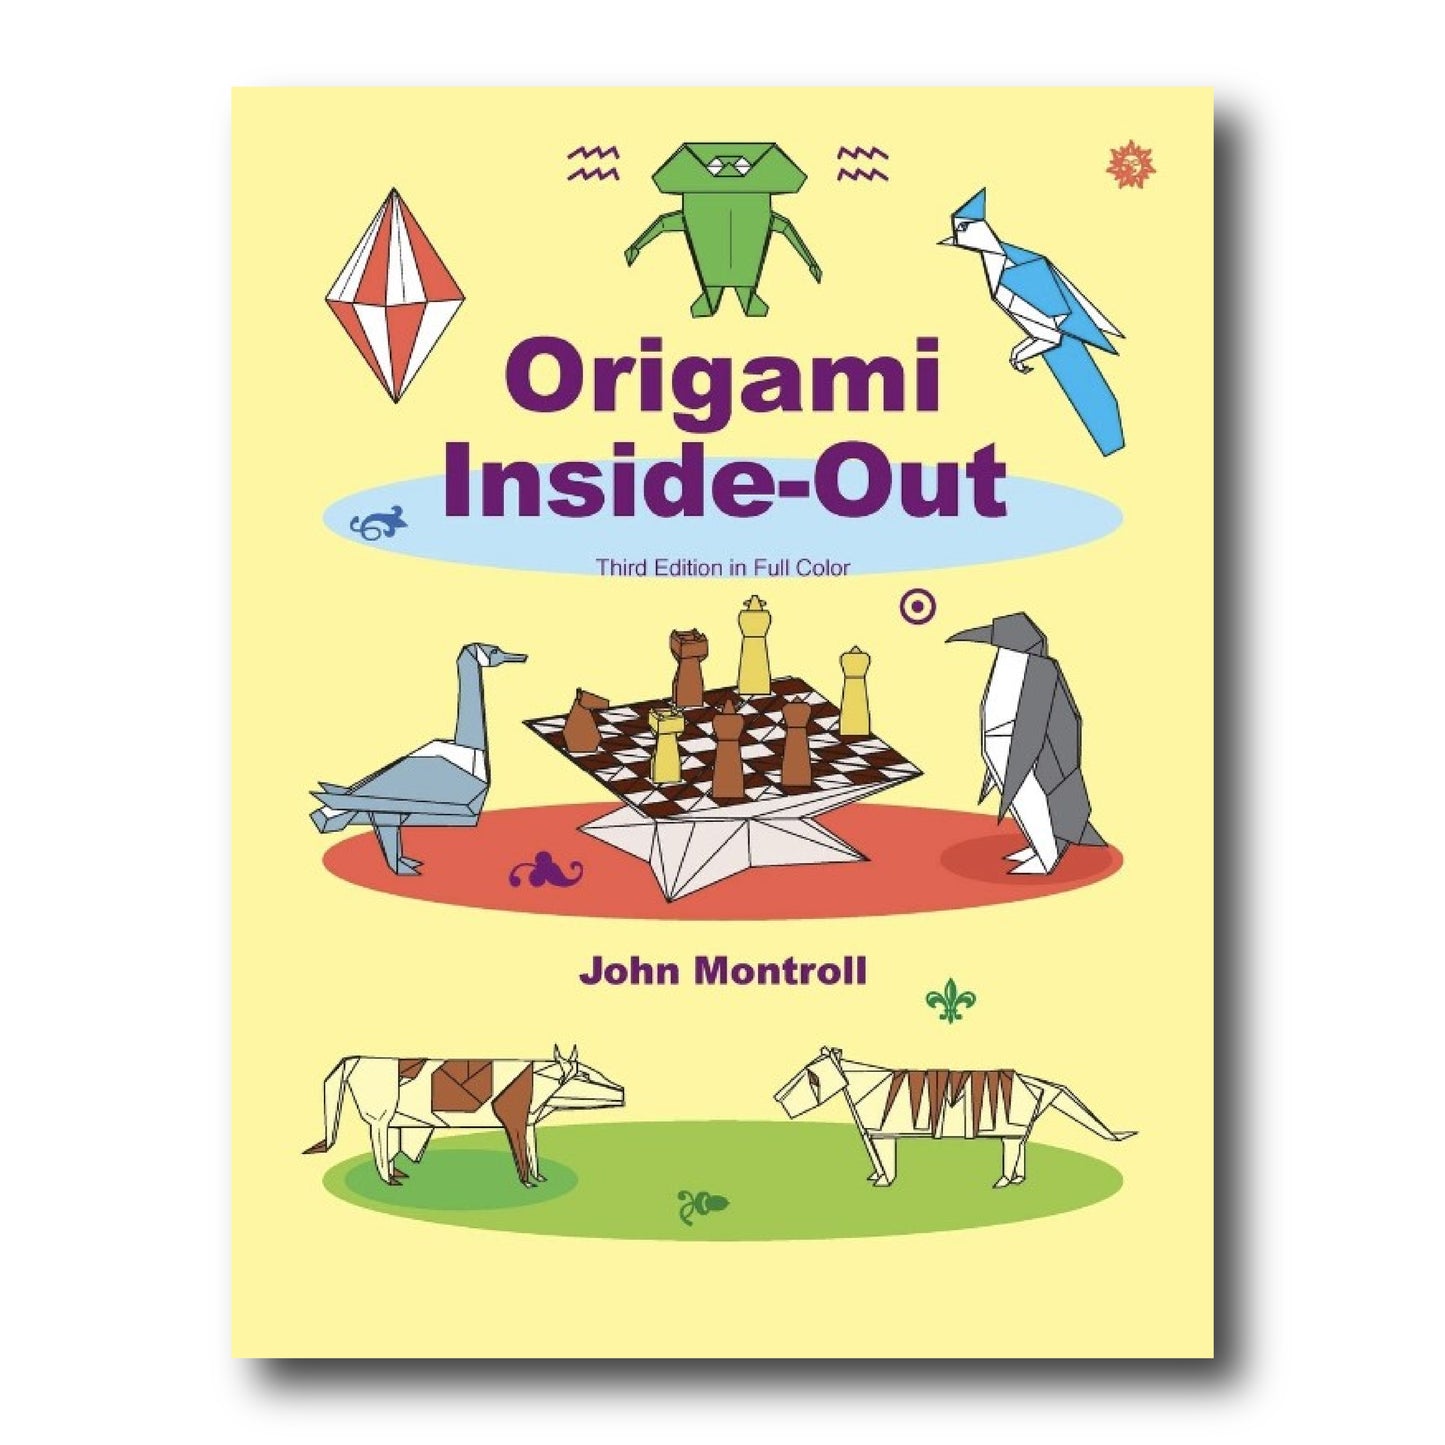 Origami Inside-Out (Third Edition in Full Color)